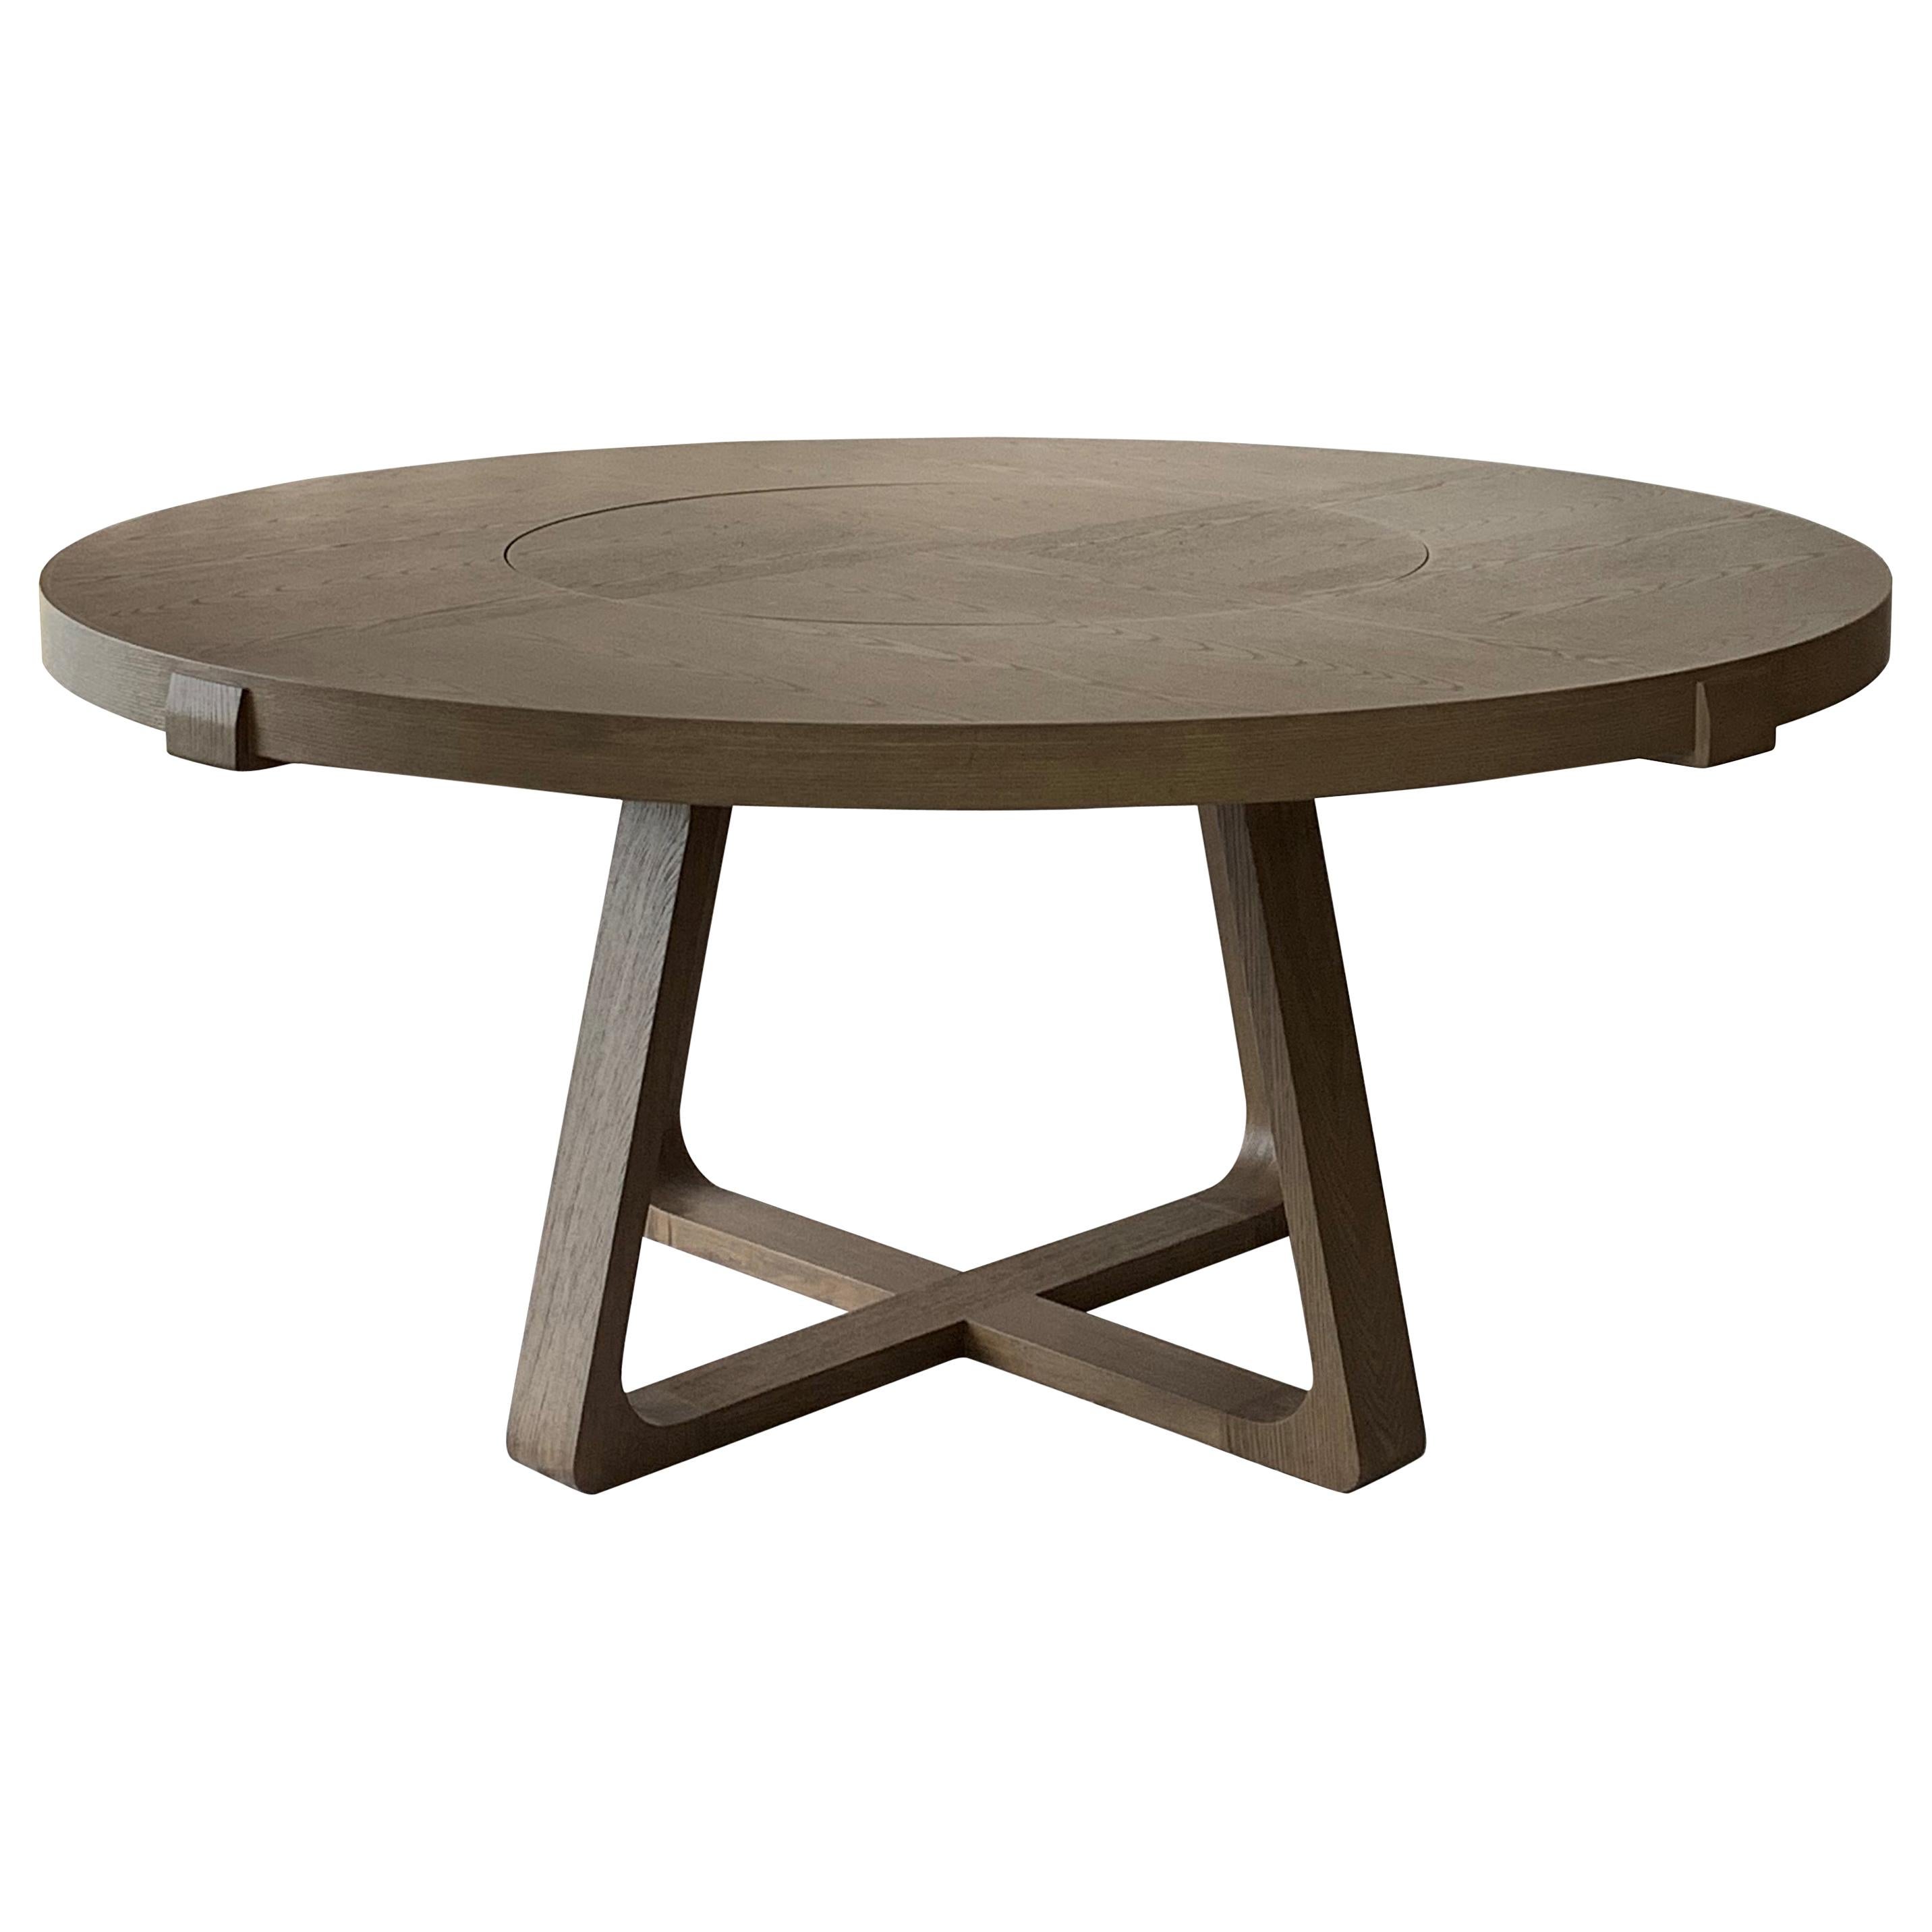 Round Dining Table With Lazy Susan 200cm Interlock André Fu Living Grey Oak New For Sale